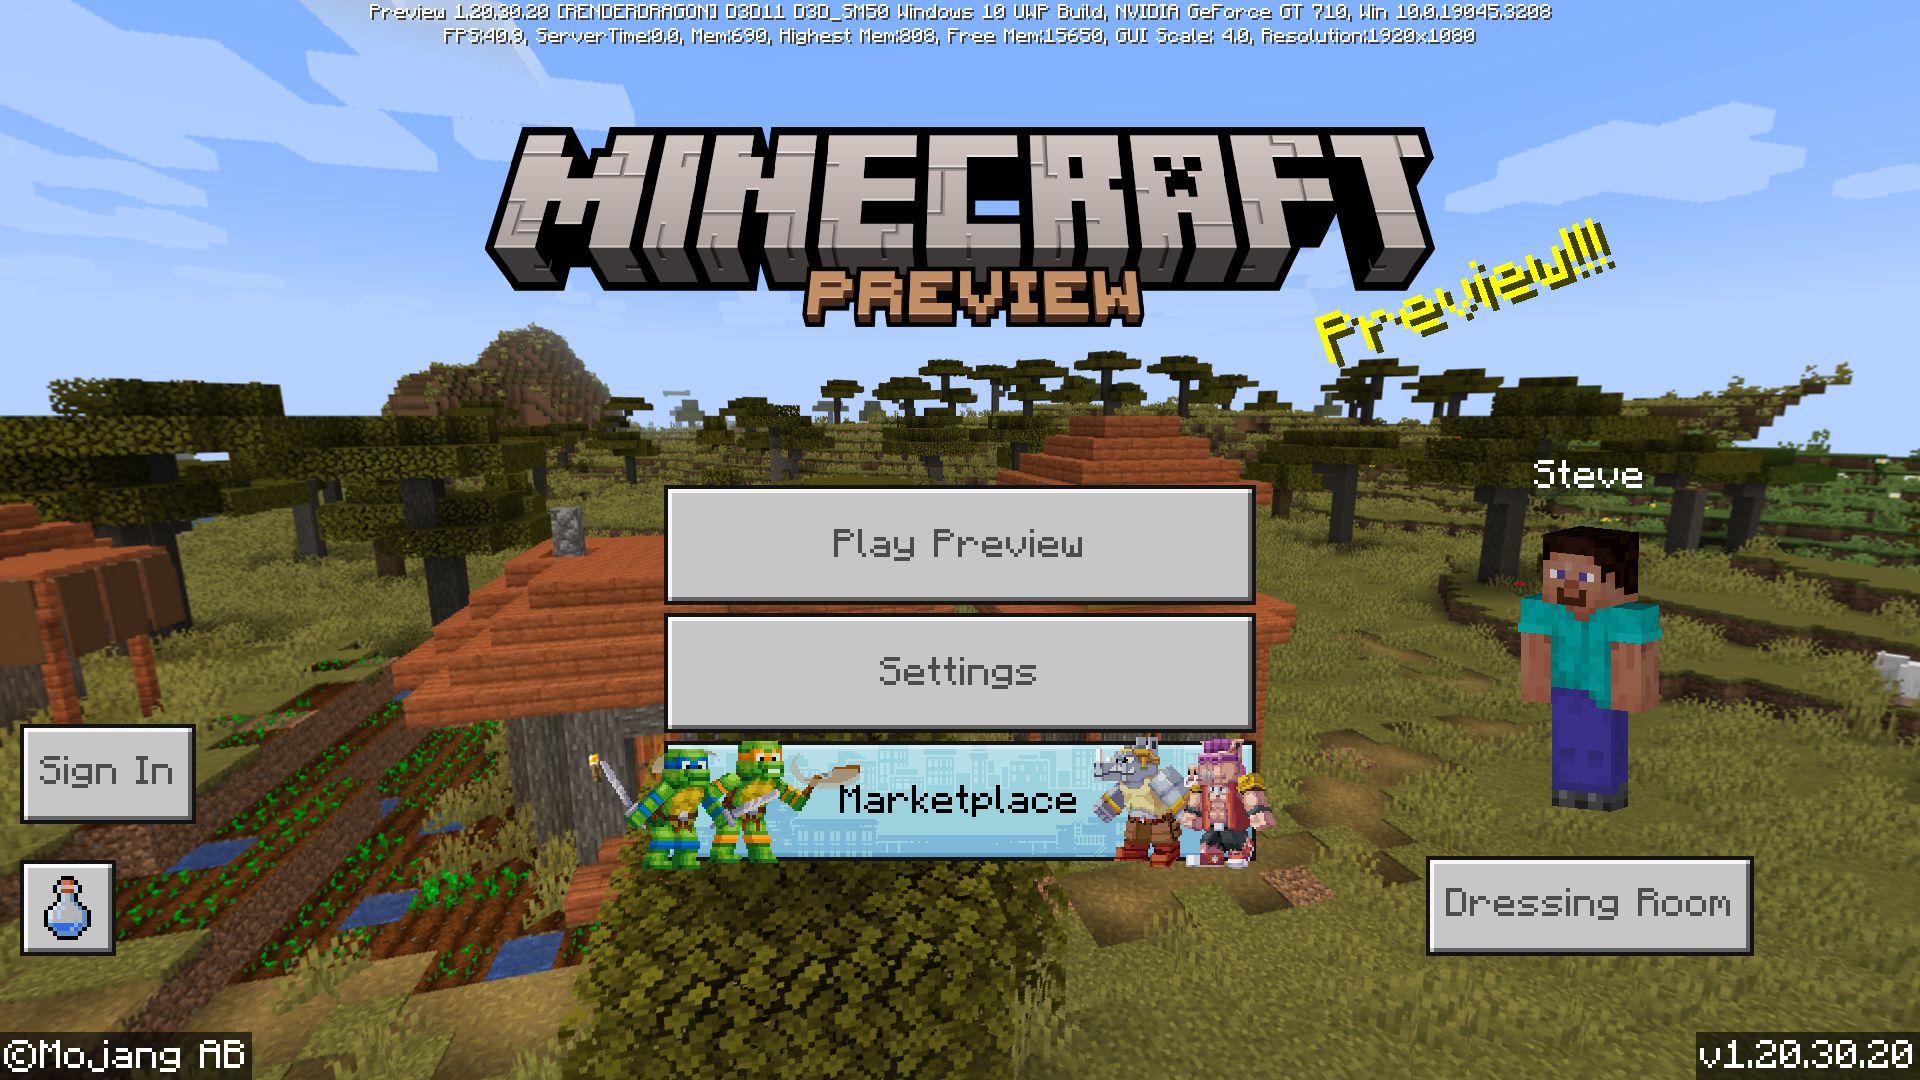 Download Minecraft PE 1.20.0.20 APK free for Android